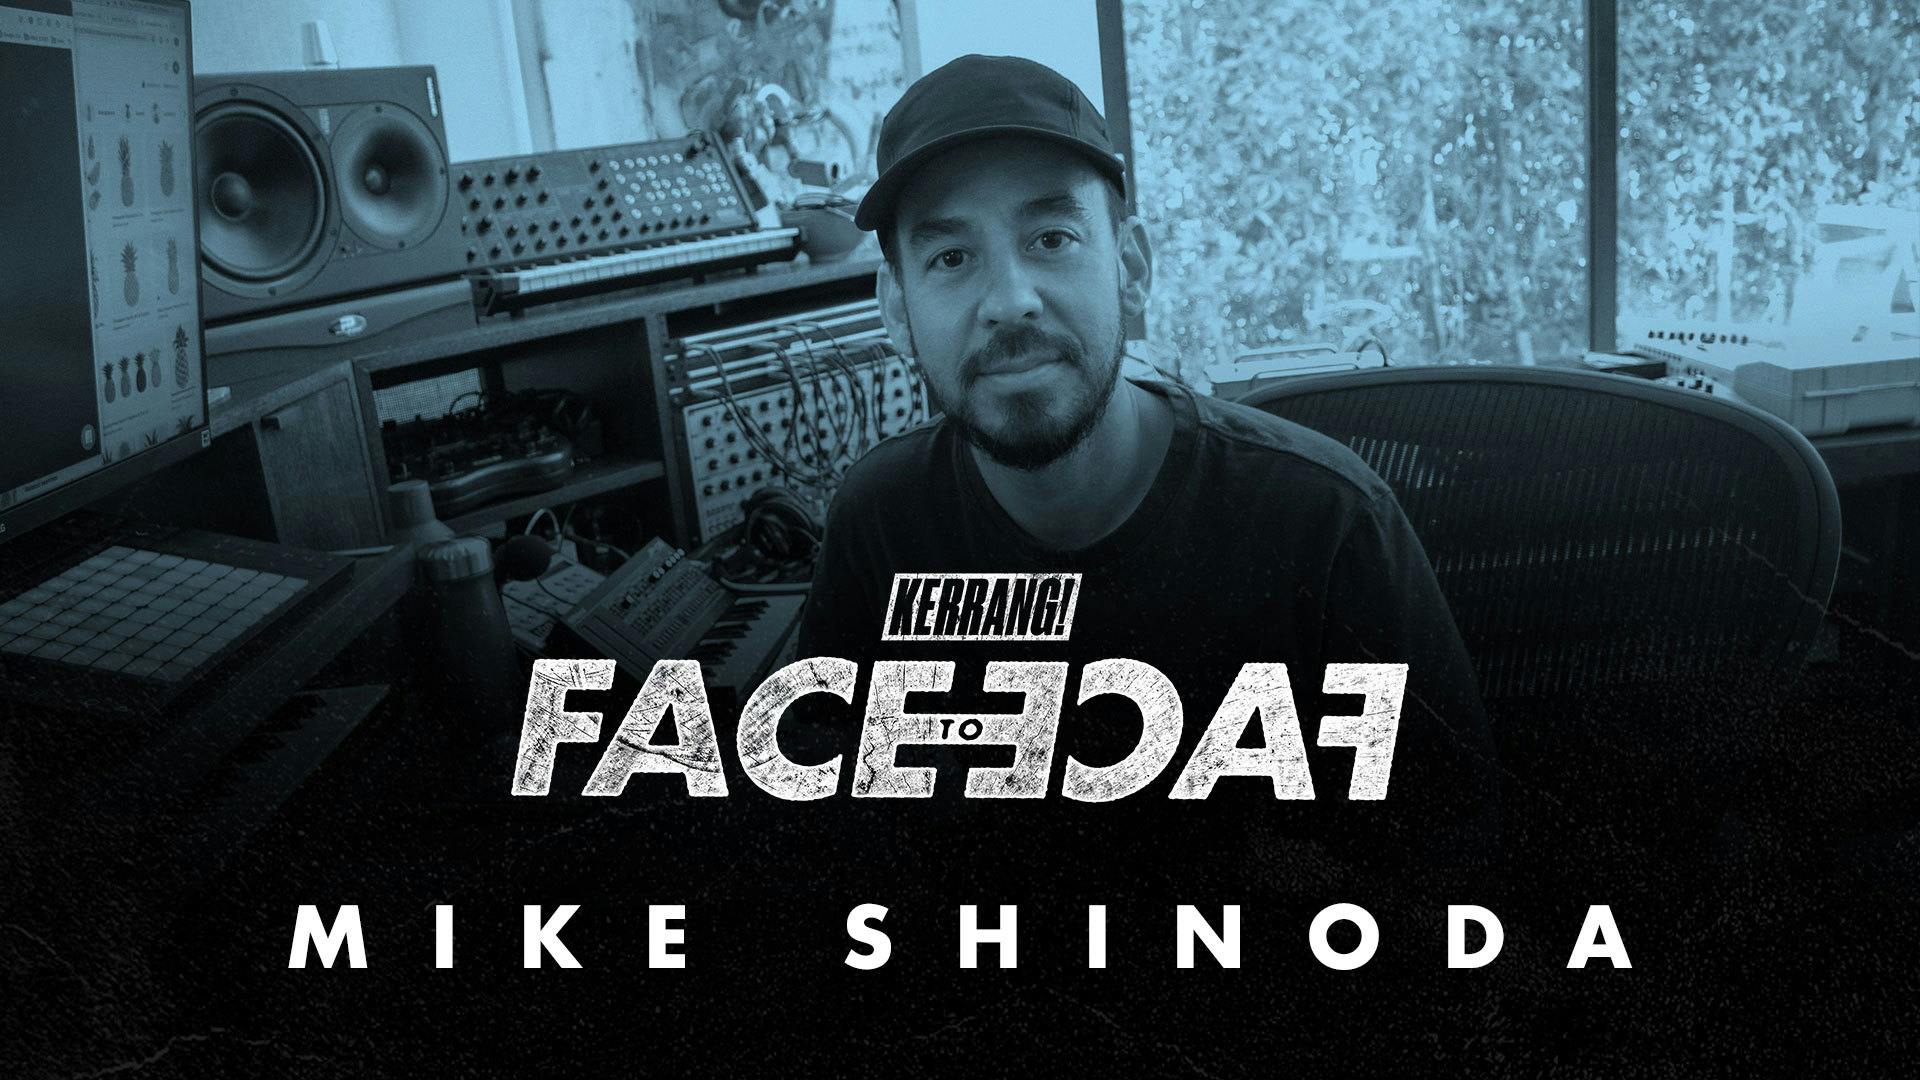 Watch: Face To Face Interview With Mike Shinoda